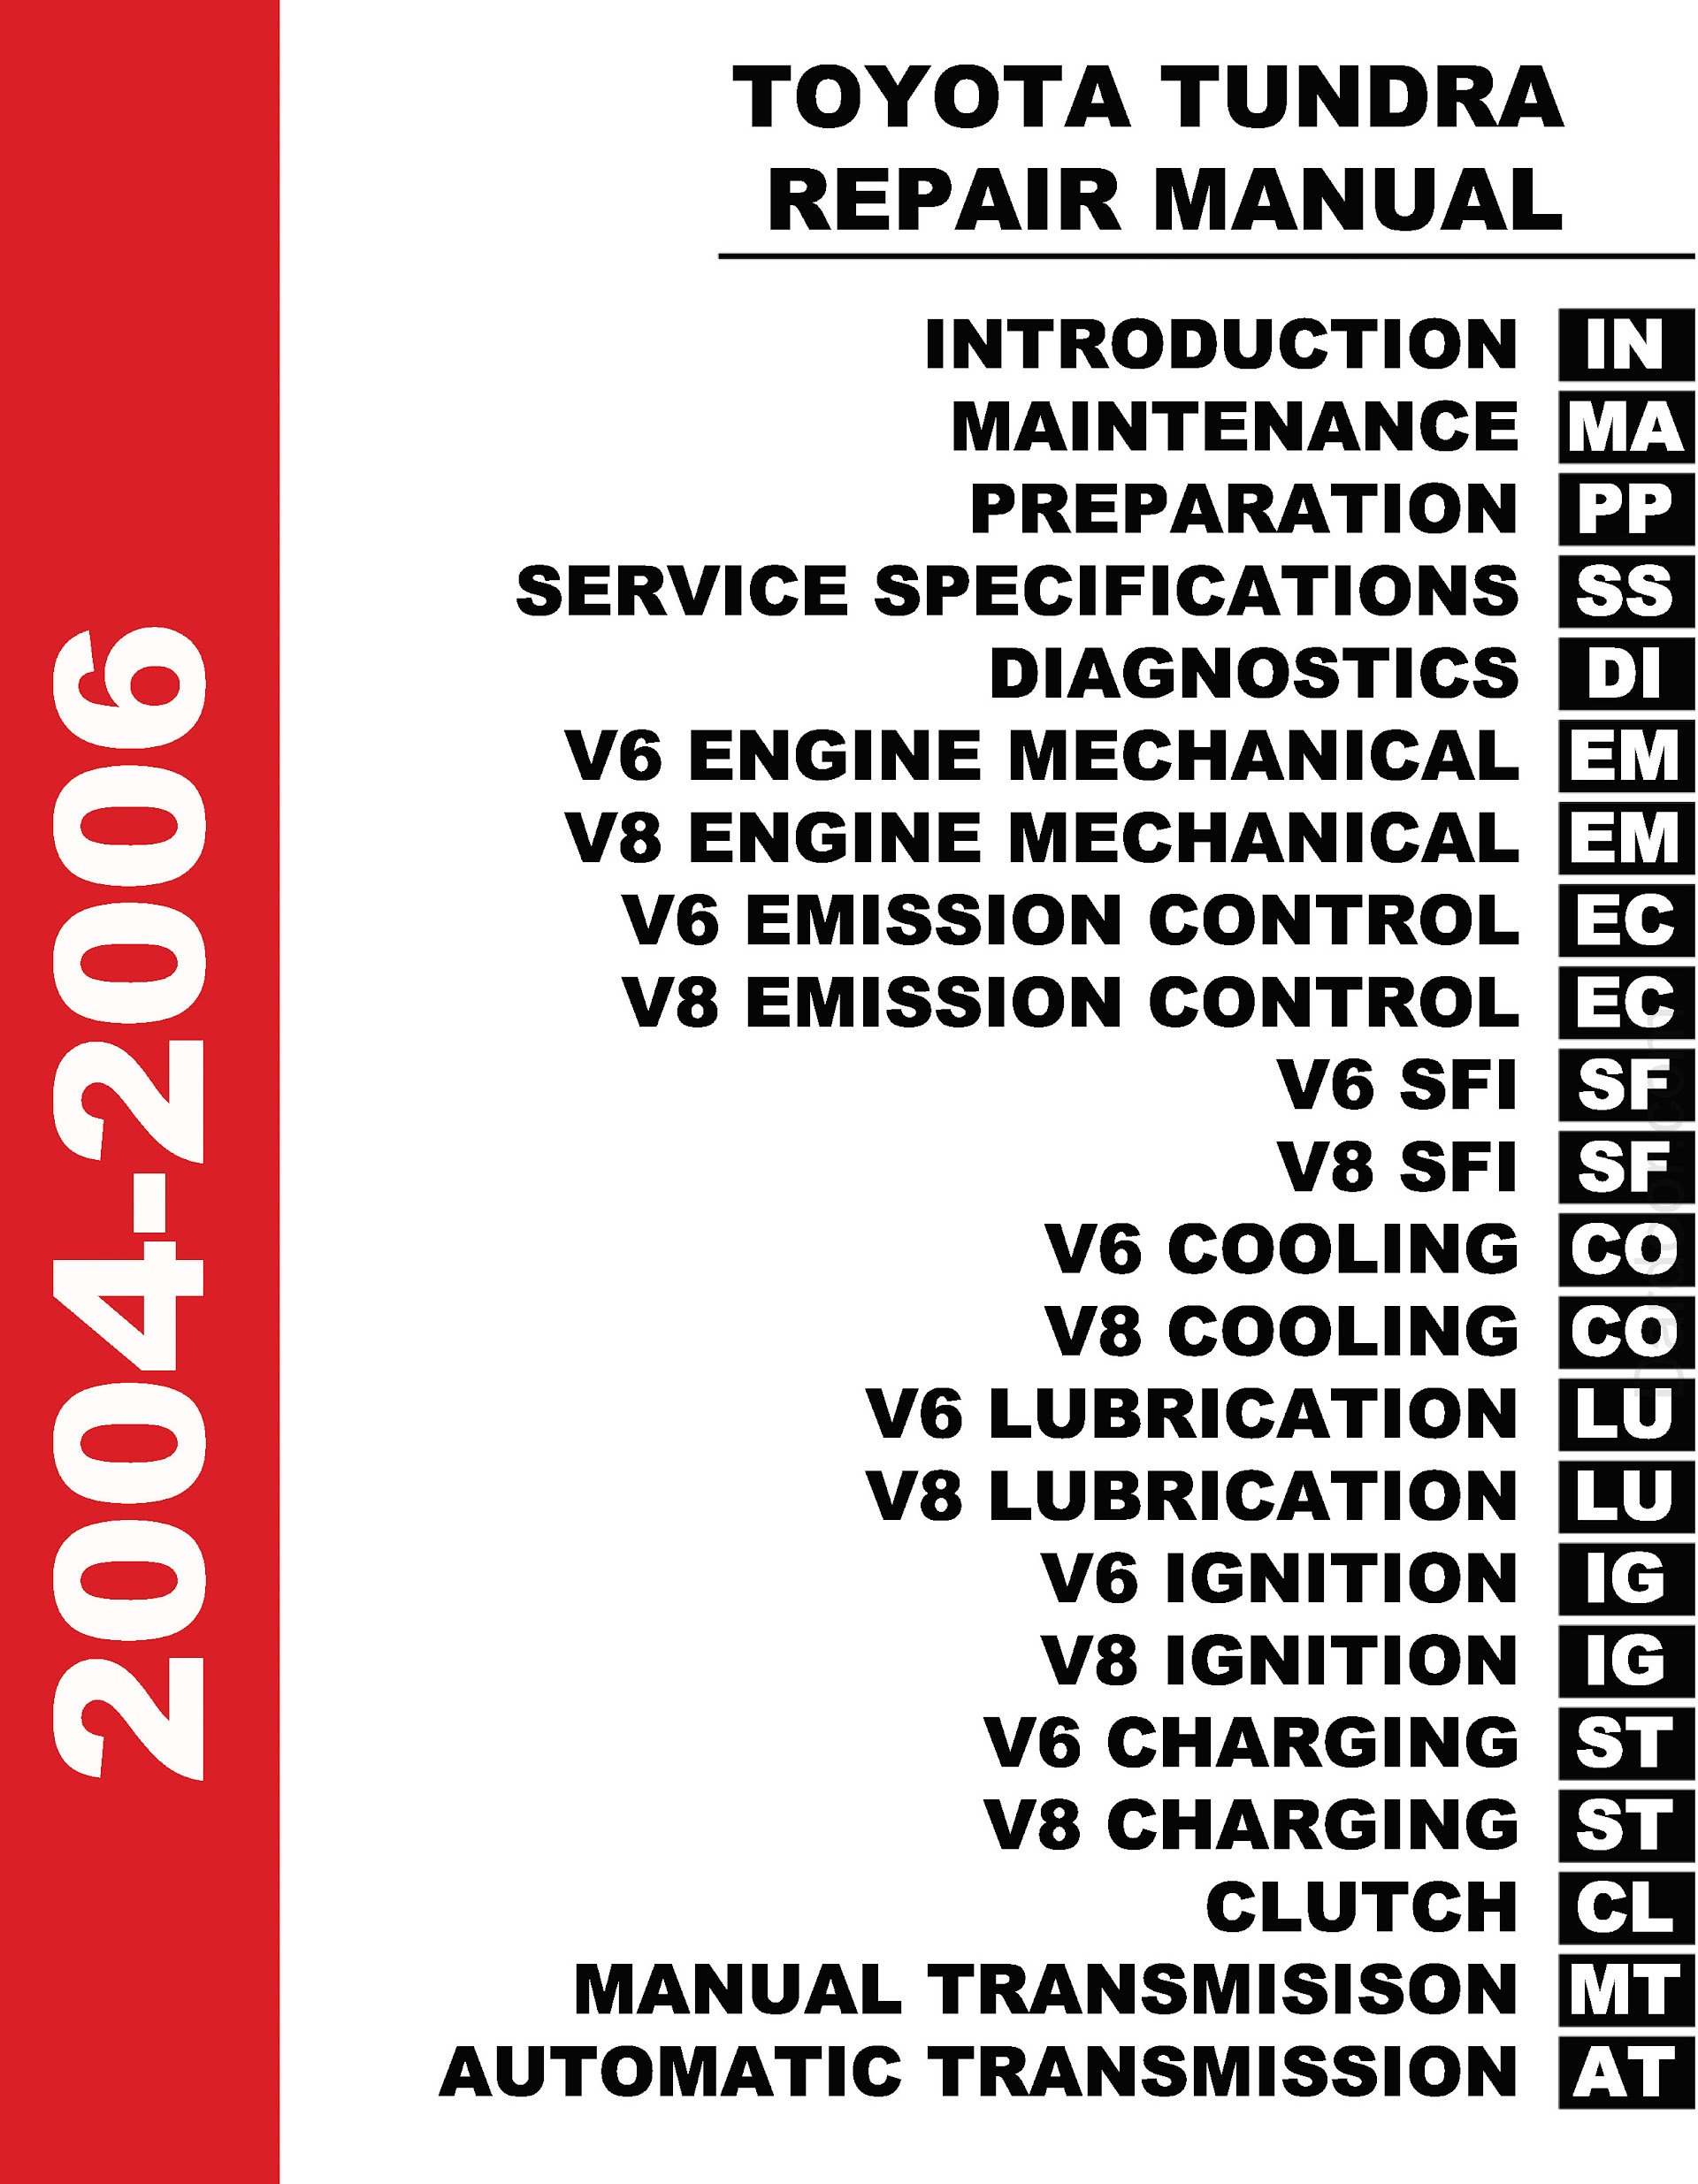 Table of Contents 2004-2006 Toyota Tundra Repair Manual